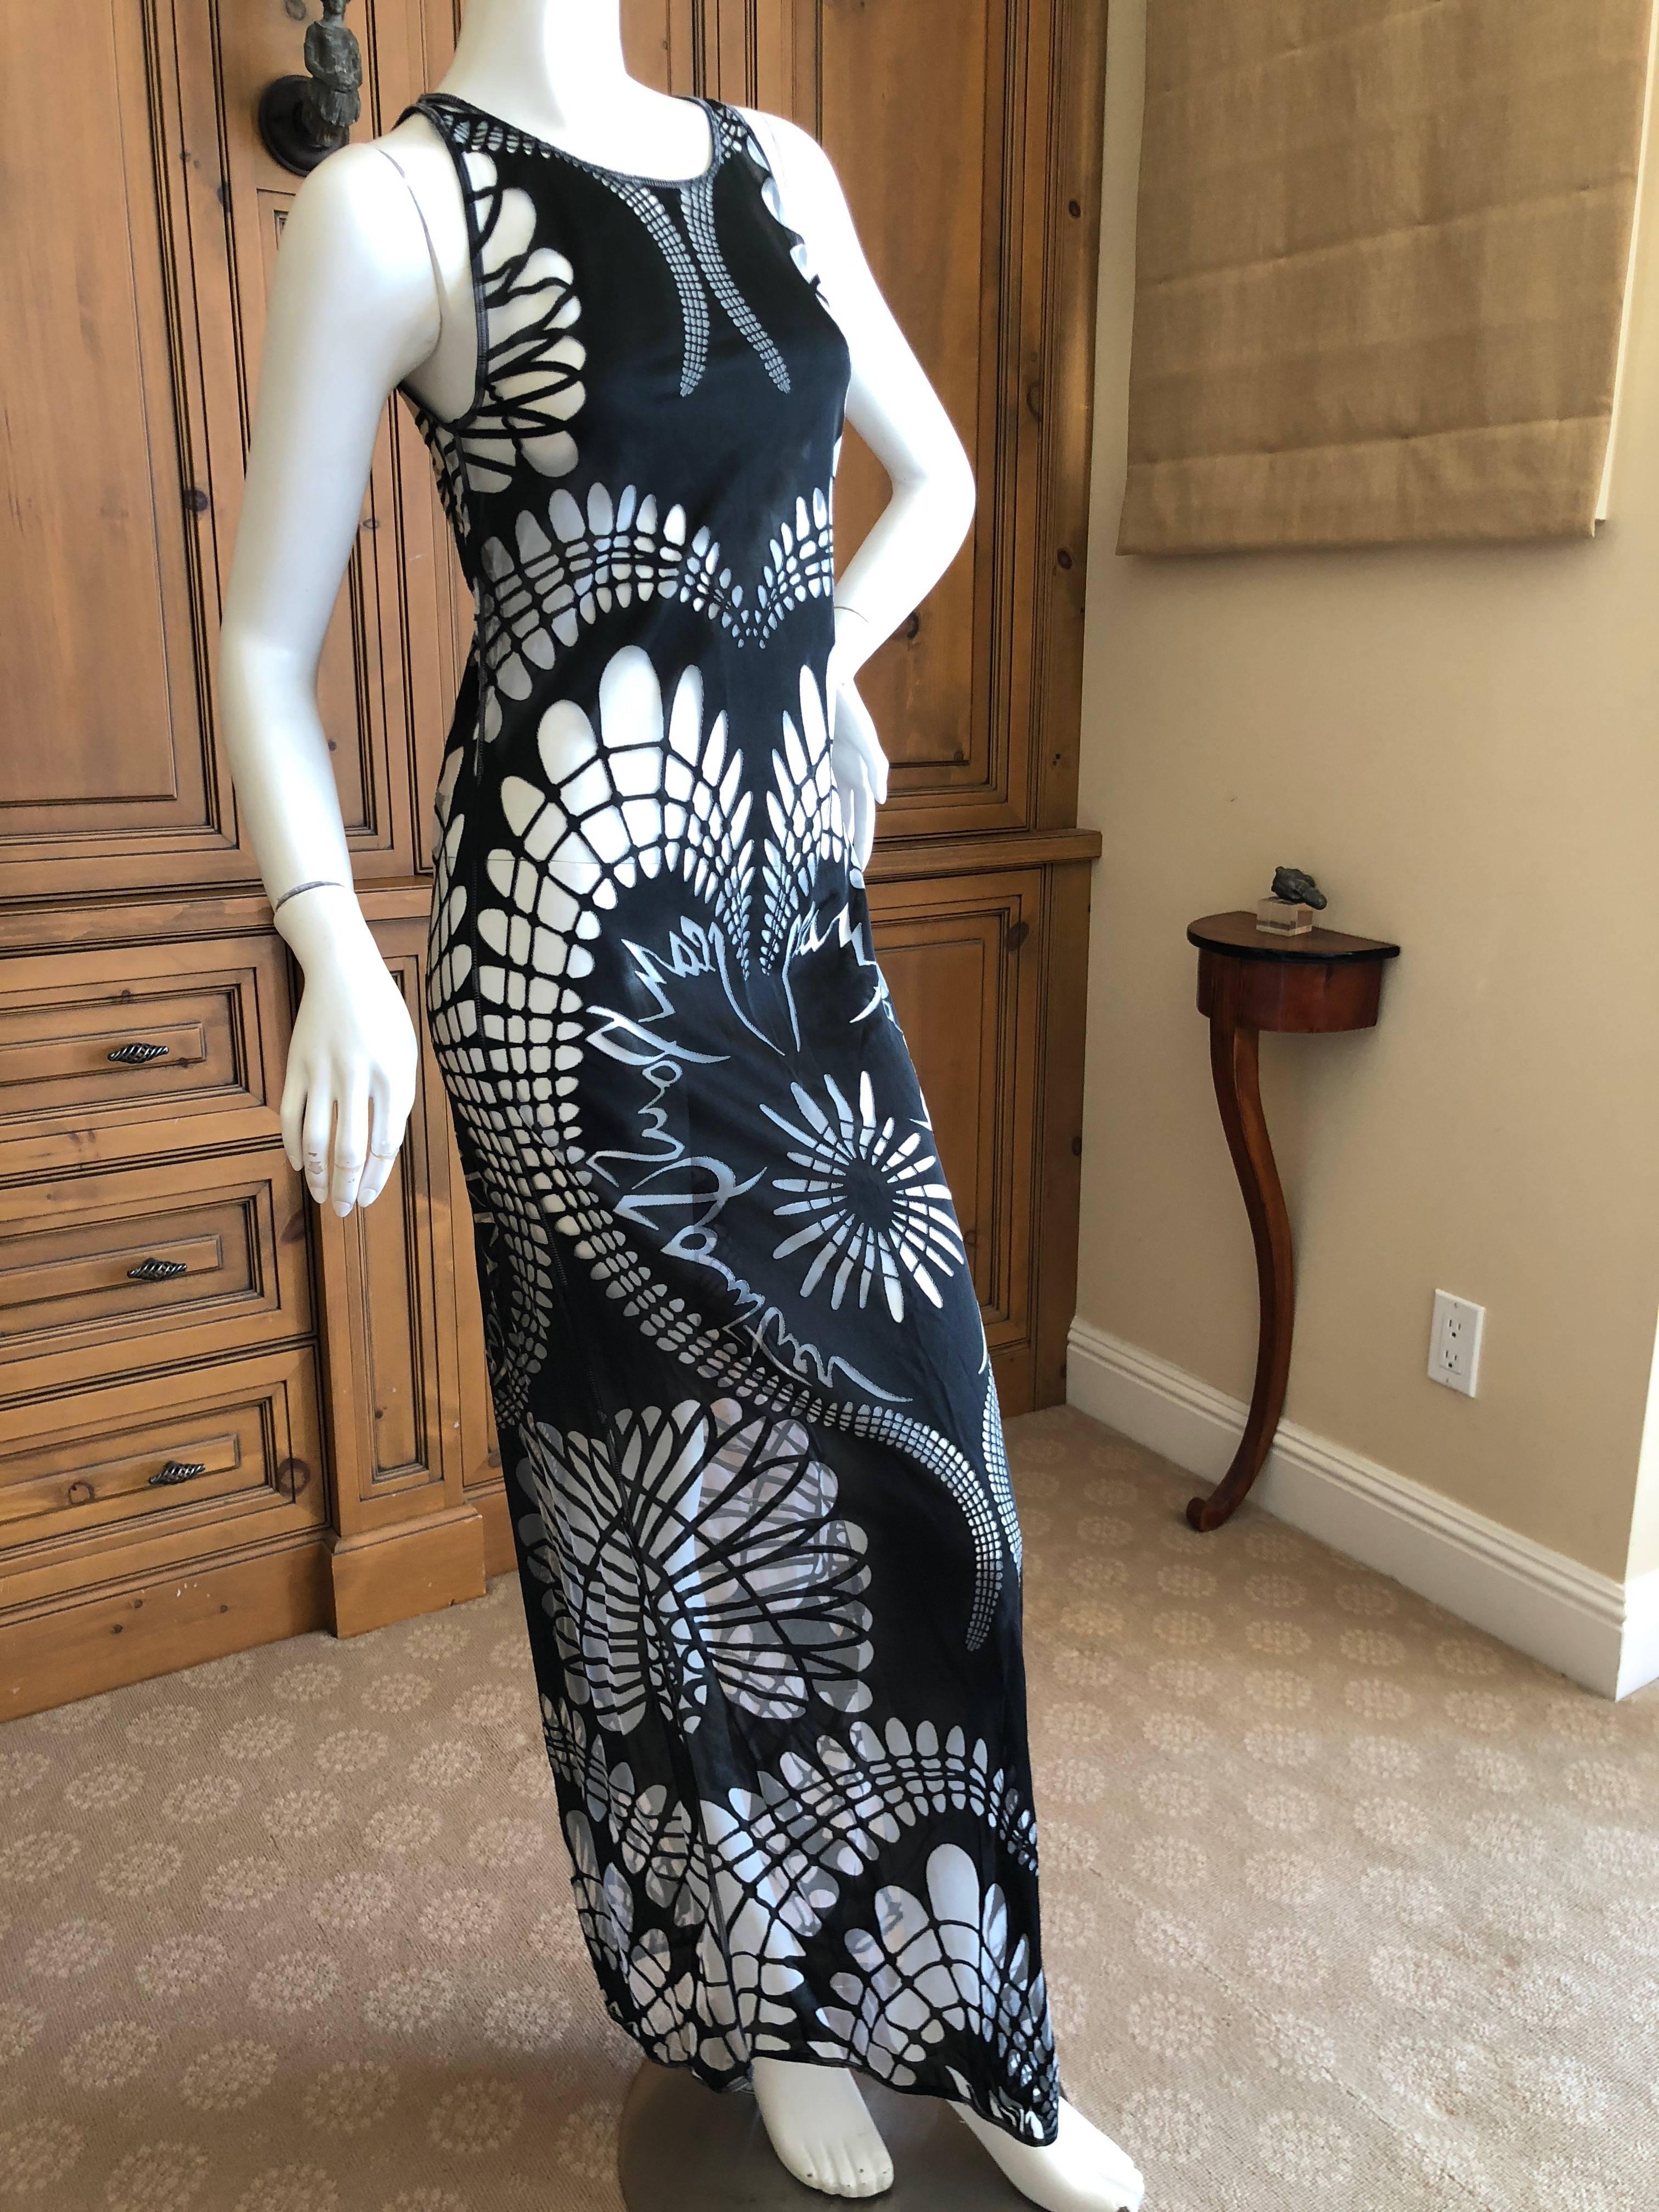 Jean Paul Gaultier Femme Vintage Sheer Maori Tattoo Dress.
 Size 40
There is a lot of stretch
Measurements are given un stretched
Bust 36